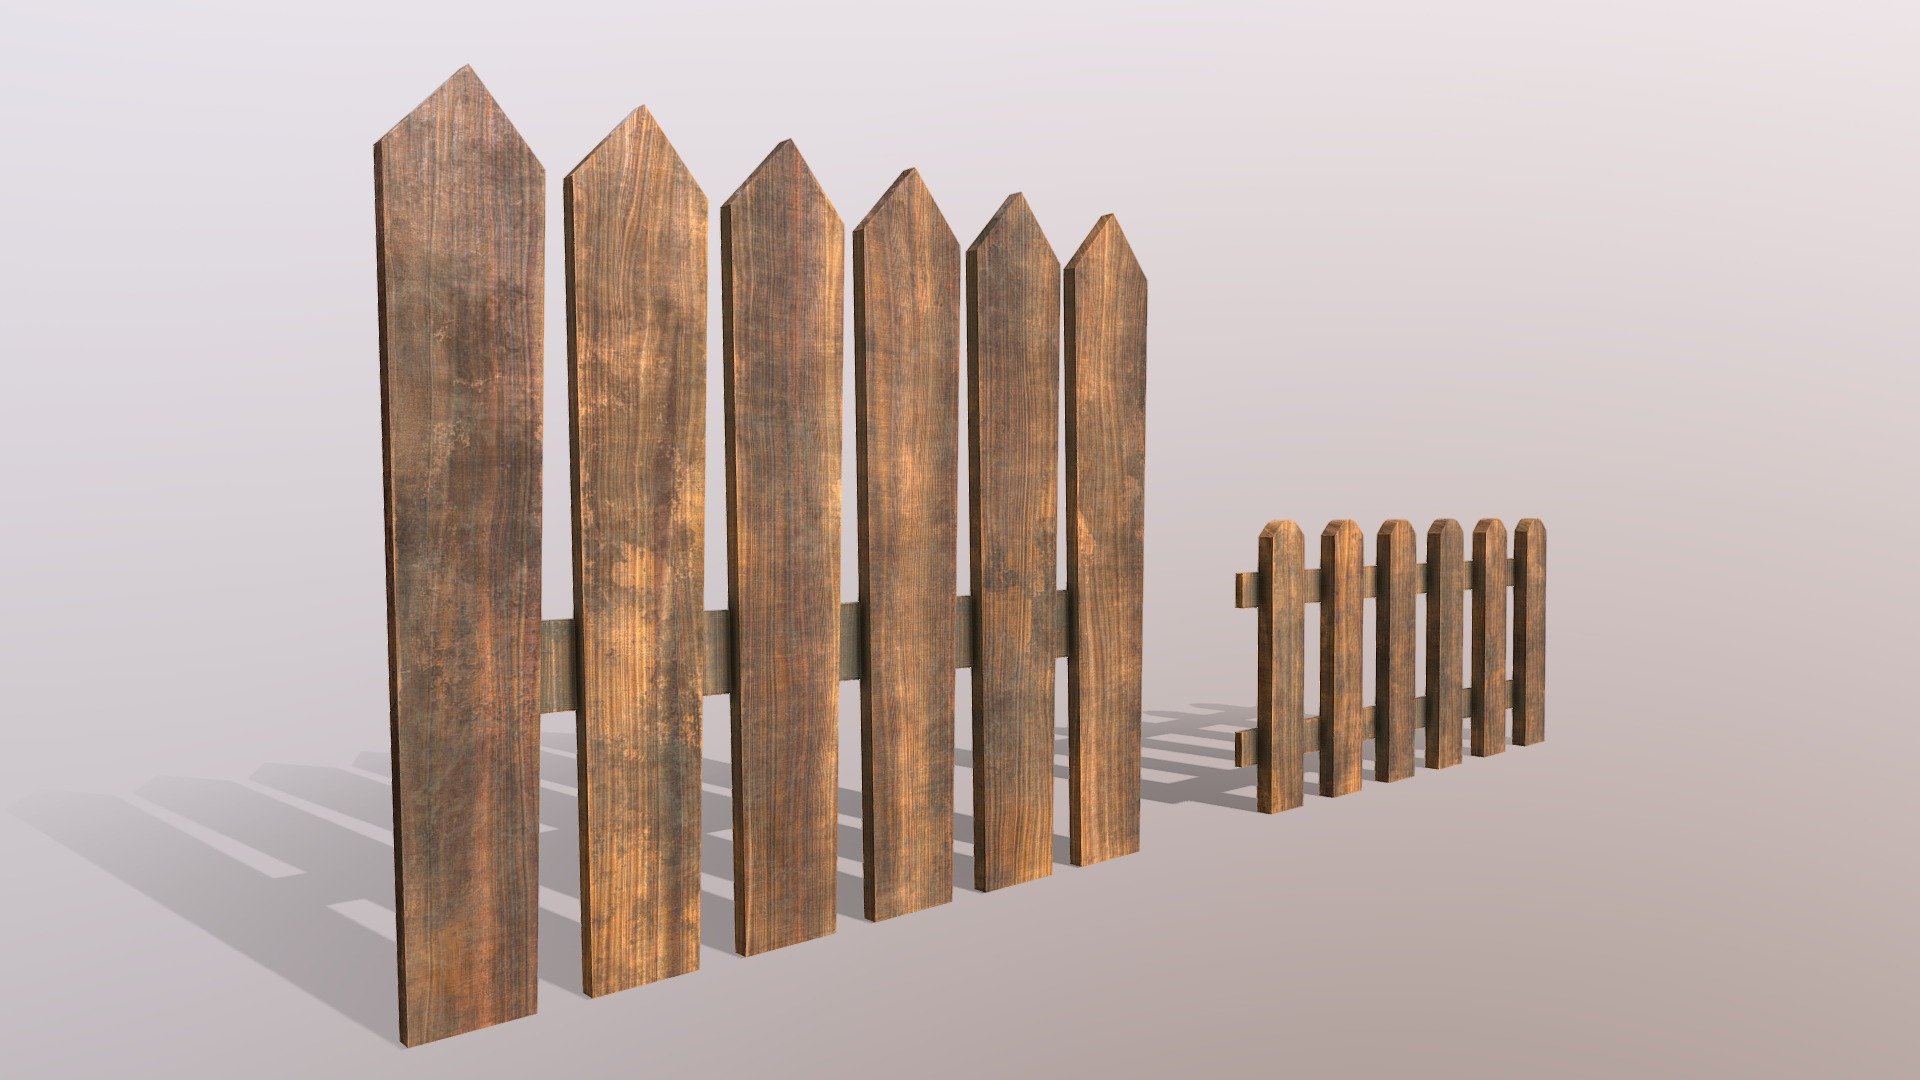 Wooden Fence Pack for games and animations. The model is game ready and compatible with game engines. 

It can be used to create a fence for realistic games.

TWO variations of the fence are included.

The package contains 4K (4096x4096) PBR textures which are highly detailed HD.

Specific PBR maps for the following  game engines are included in separate folders contained in the package:




Unity

Unreal

PBR - Metal Rough

The package contains 2 Individual modular pieces that can be arranged in any desired formation.

Pieces included:




Large fence

Small fence

Total polycount - 228 polygons - 156 Vertices (Low-Poly)

The 3d model is properly UV mapped with non-overlapping and optimised UV's for a better texel density.  

Create and build your own PC &amp; mobile environments using our PBR Modular Fence Pack.

This fence pack is just one out of a series of urban packs offered by us. Have a look at our store to find more types 3d model